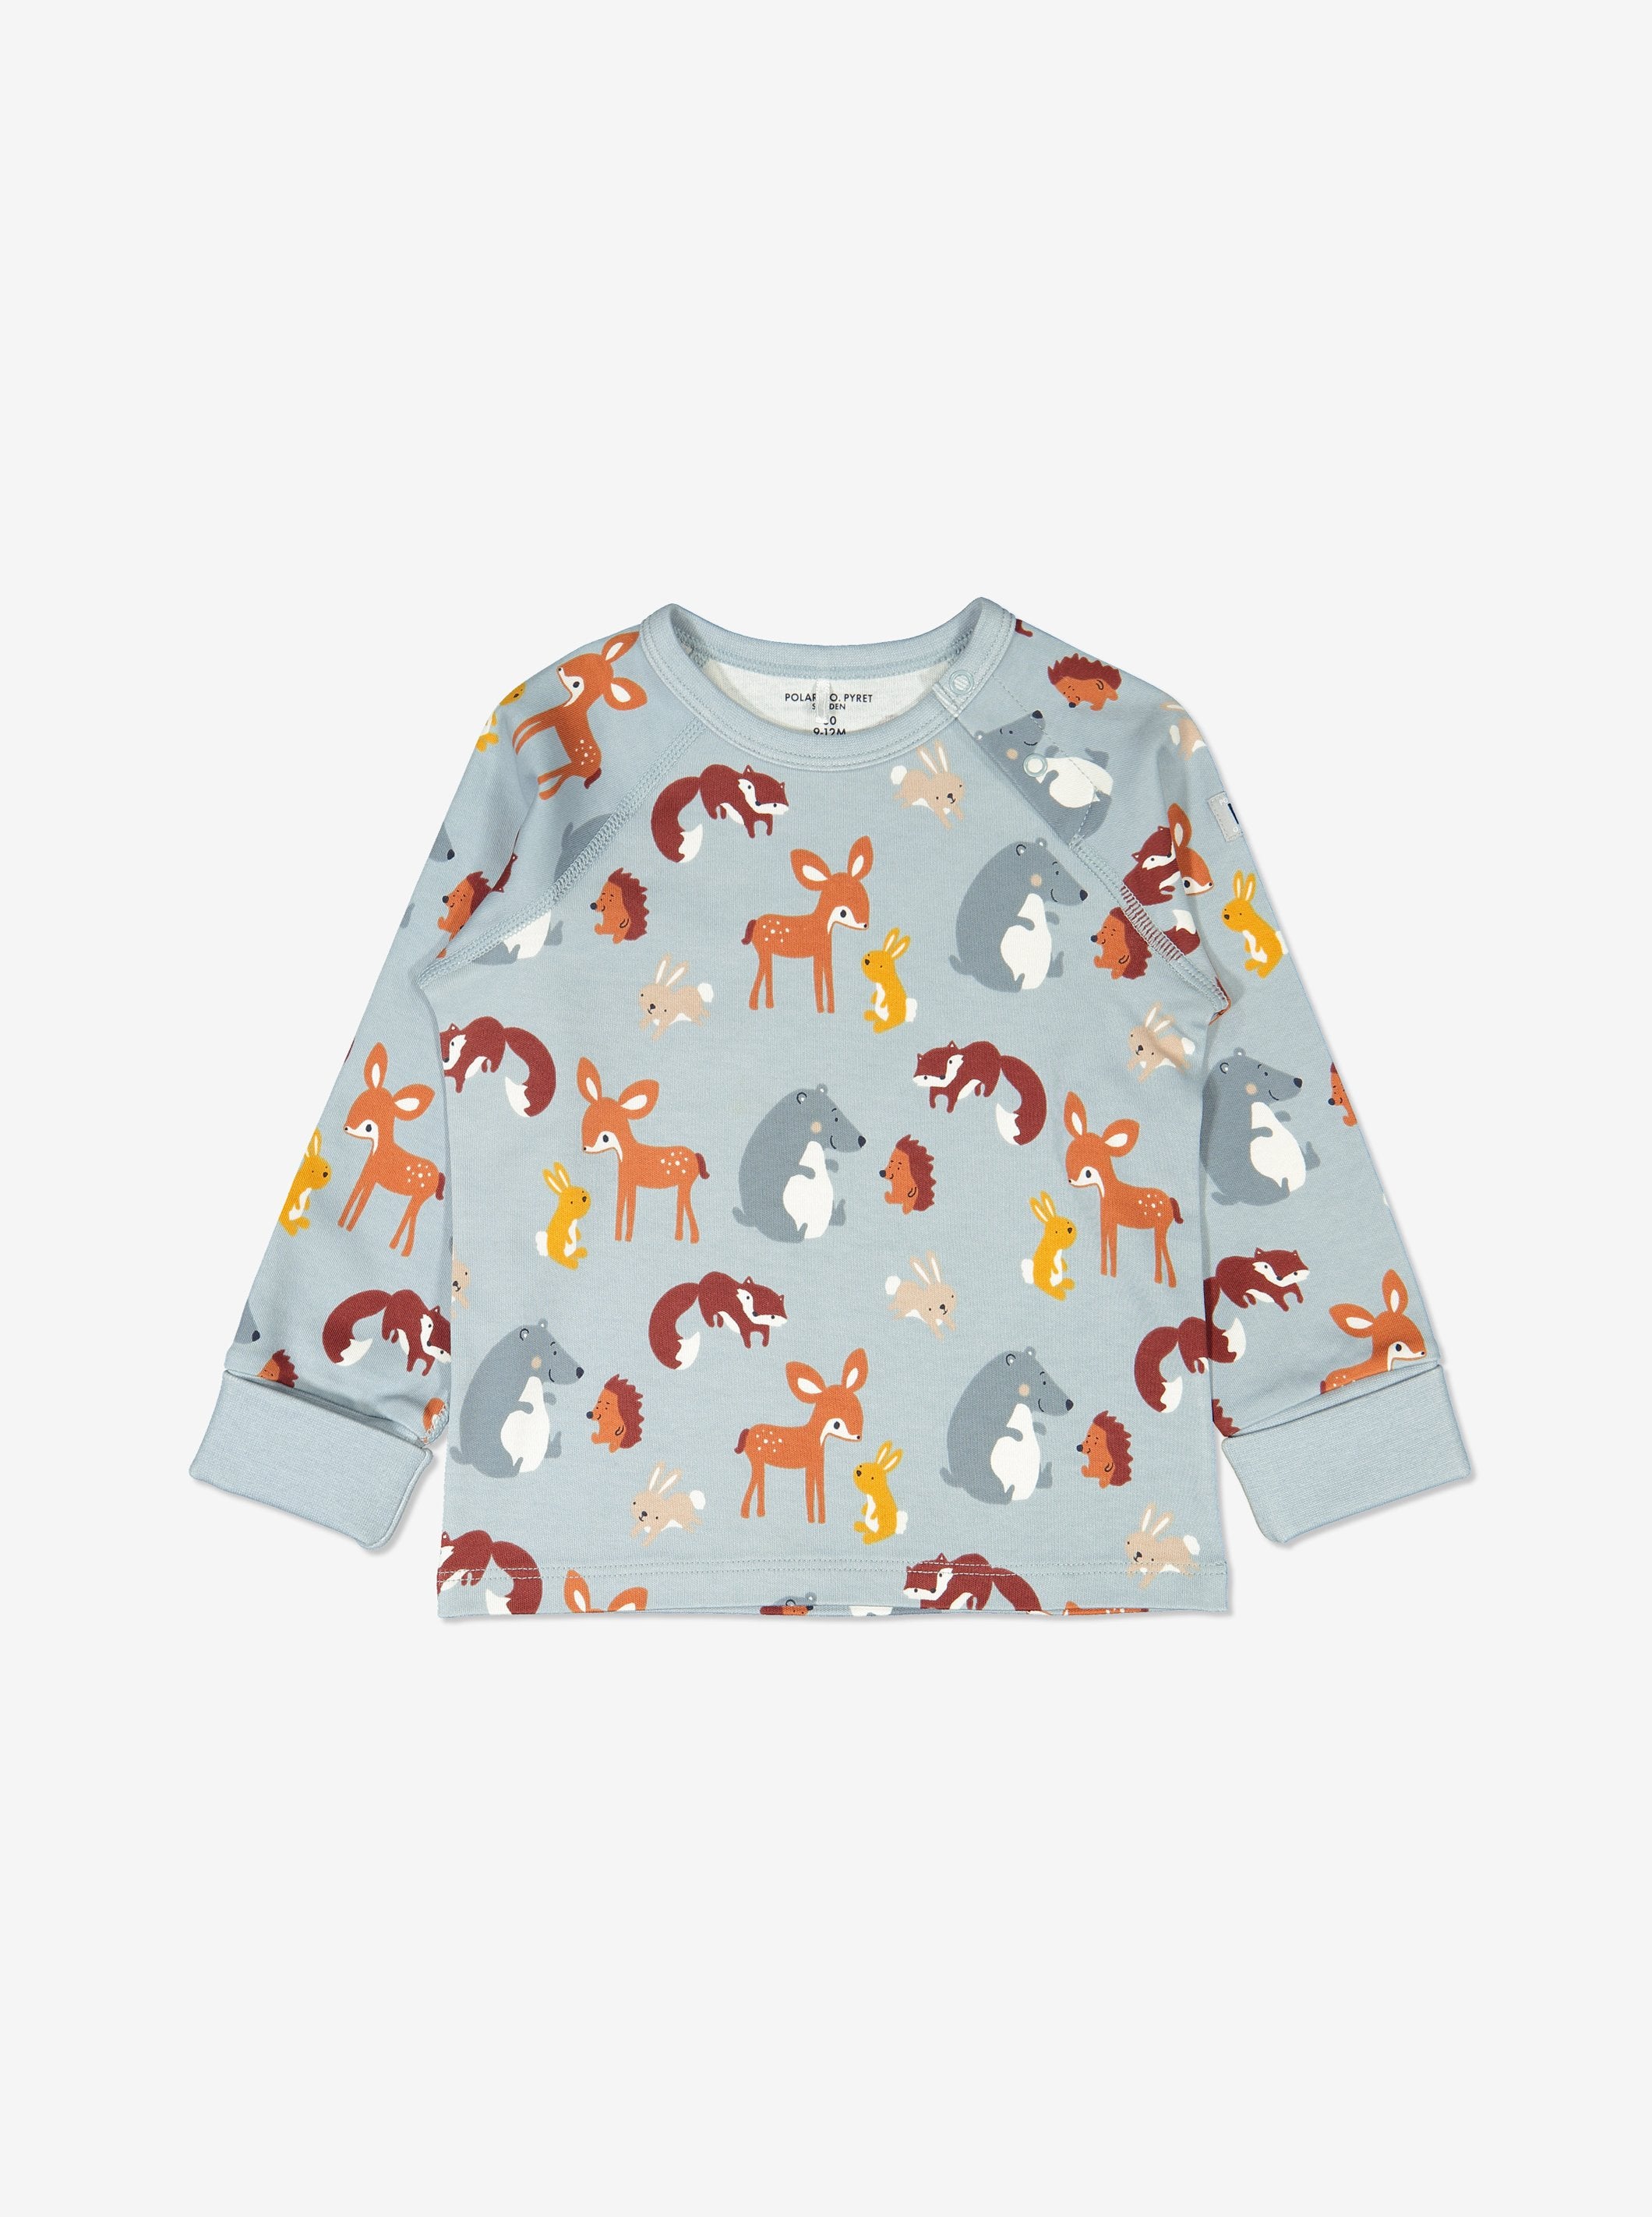 Woodland Friends Baby Top